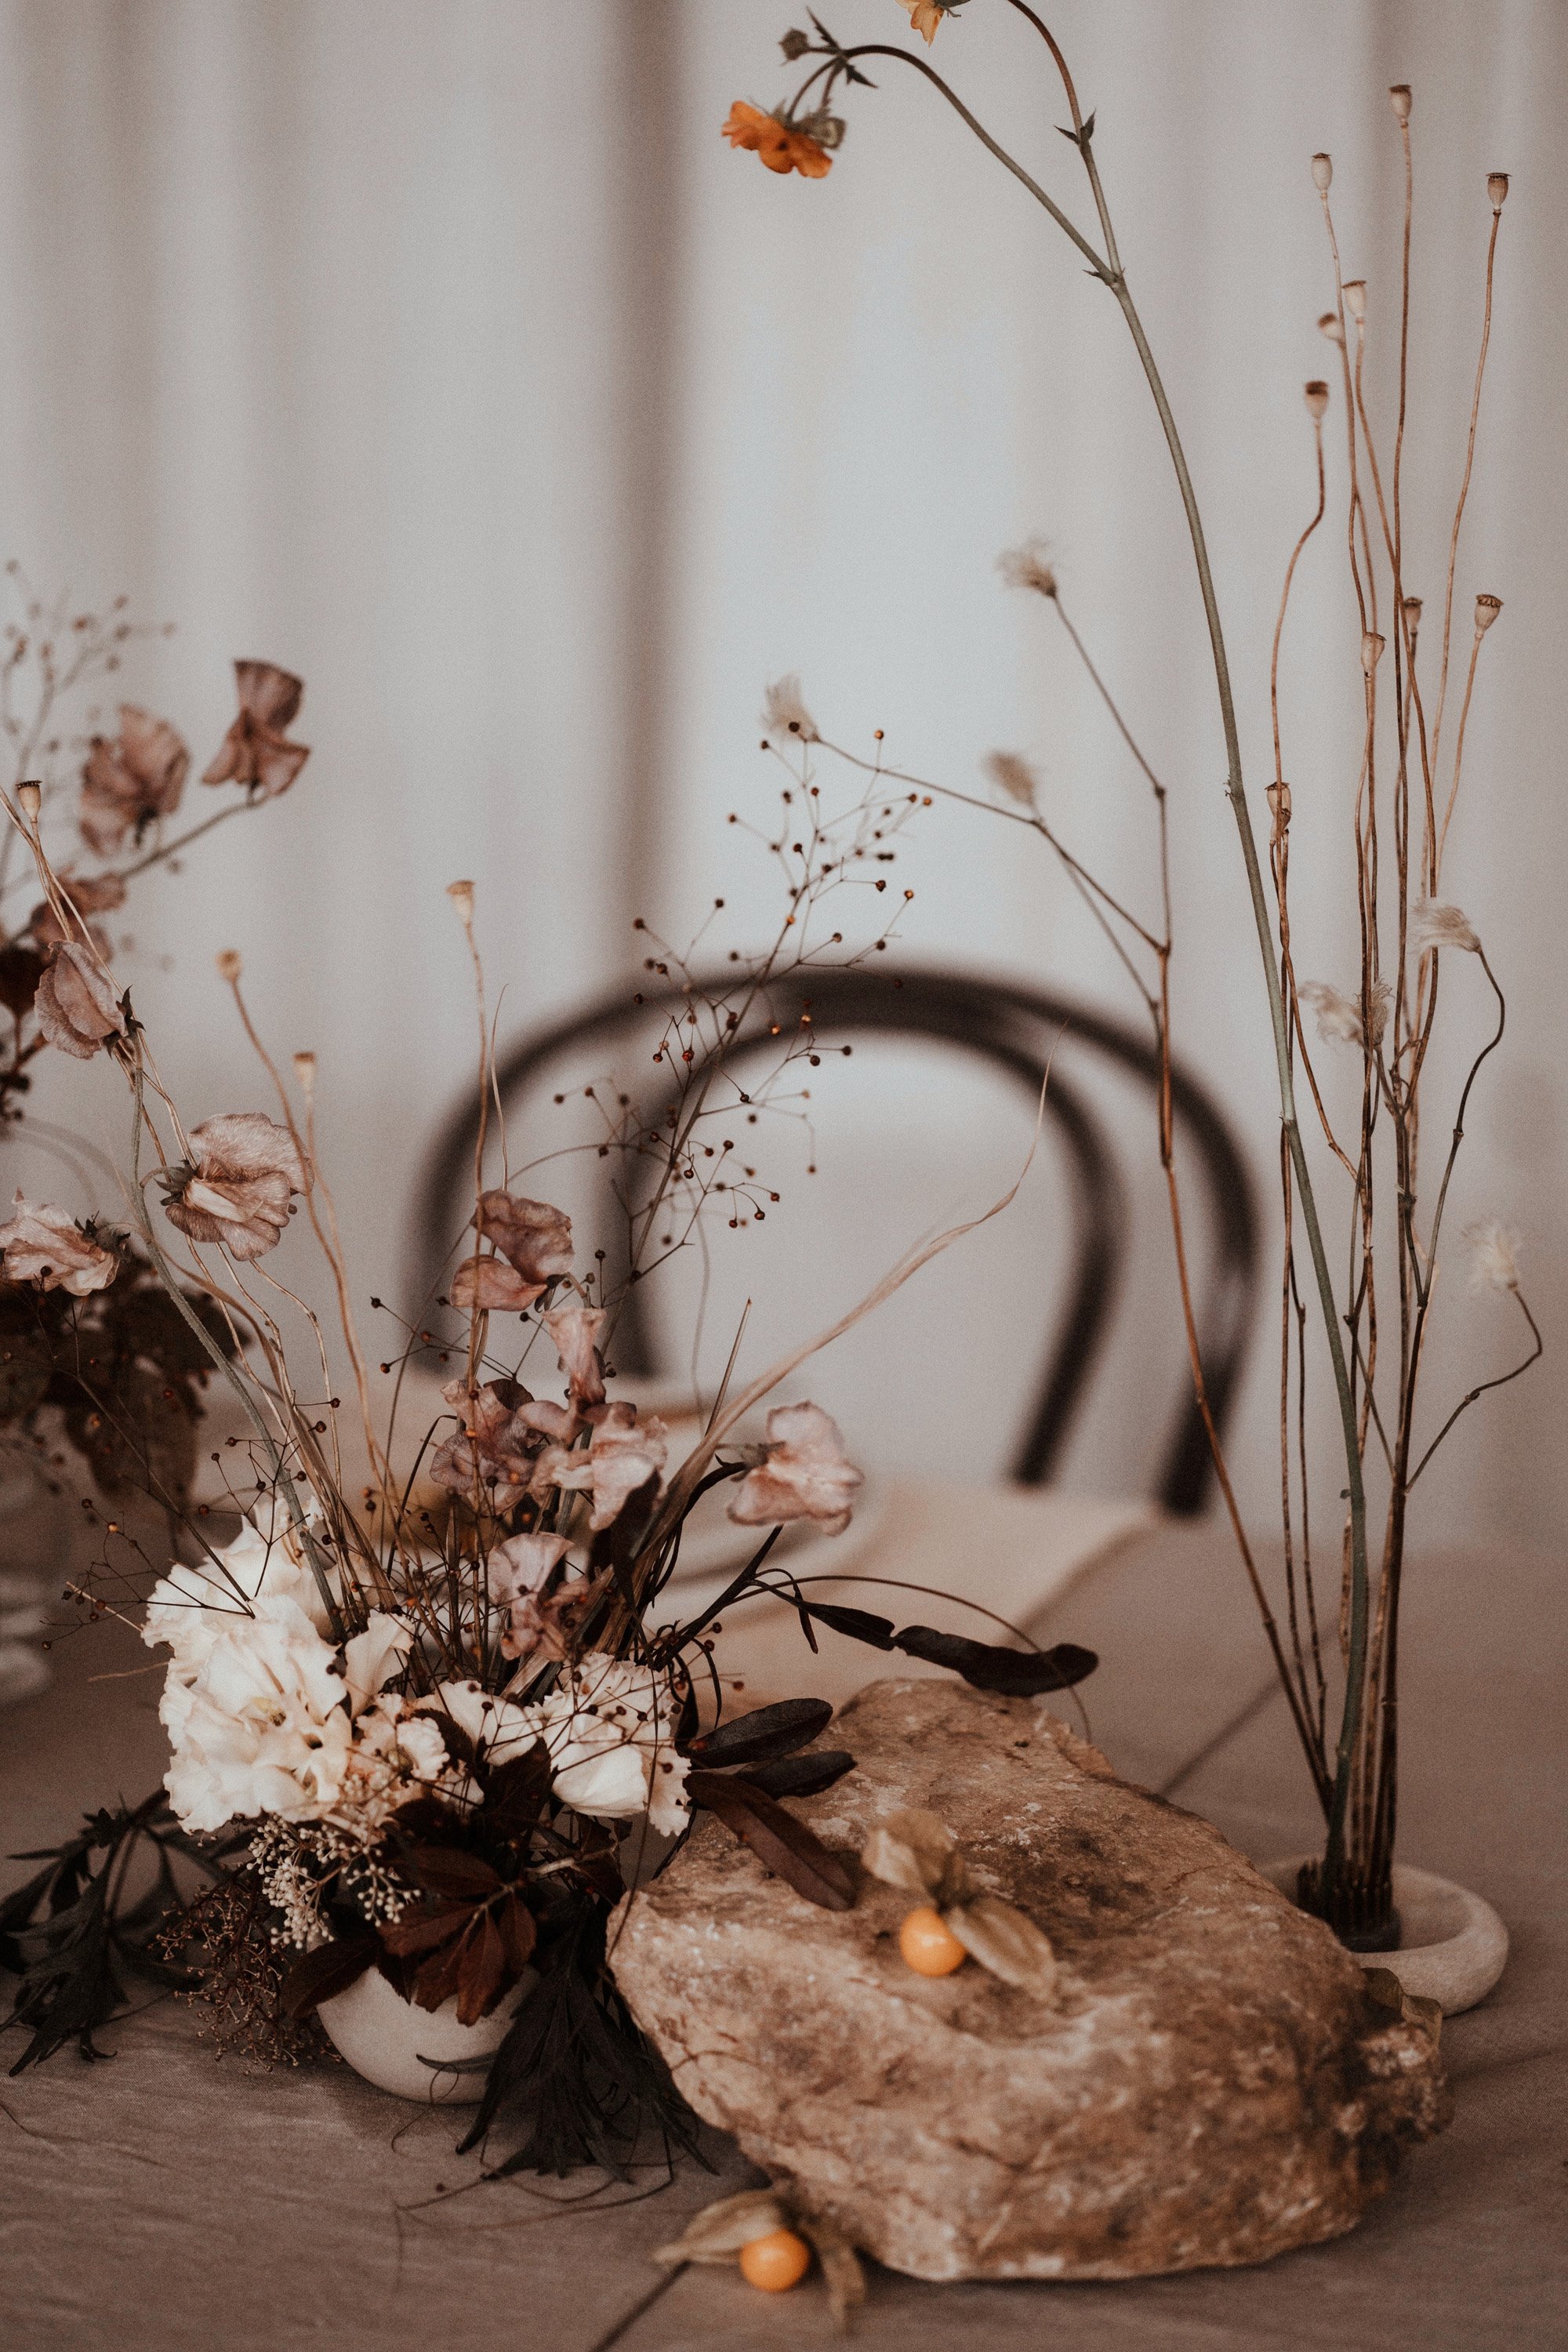 Eco florals for natural wedding inspiration at sustainable venue elmore court